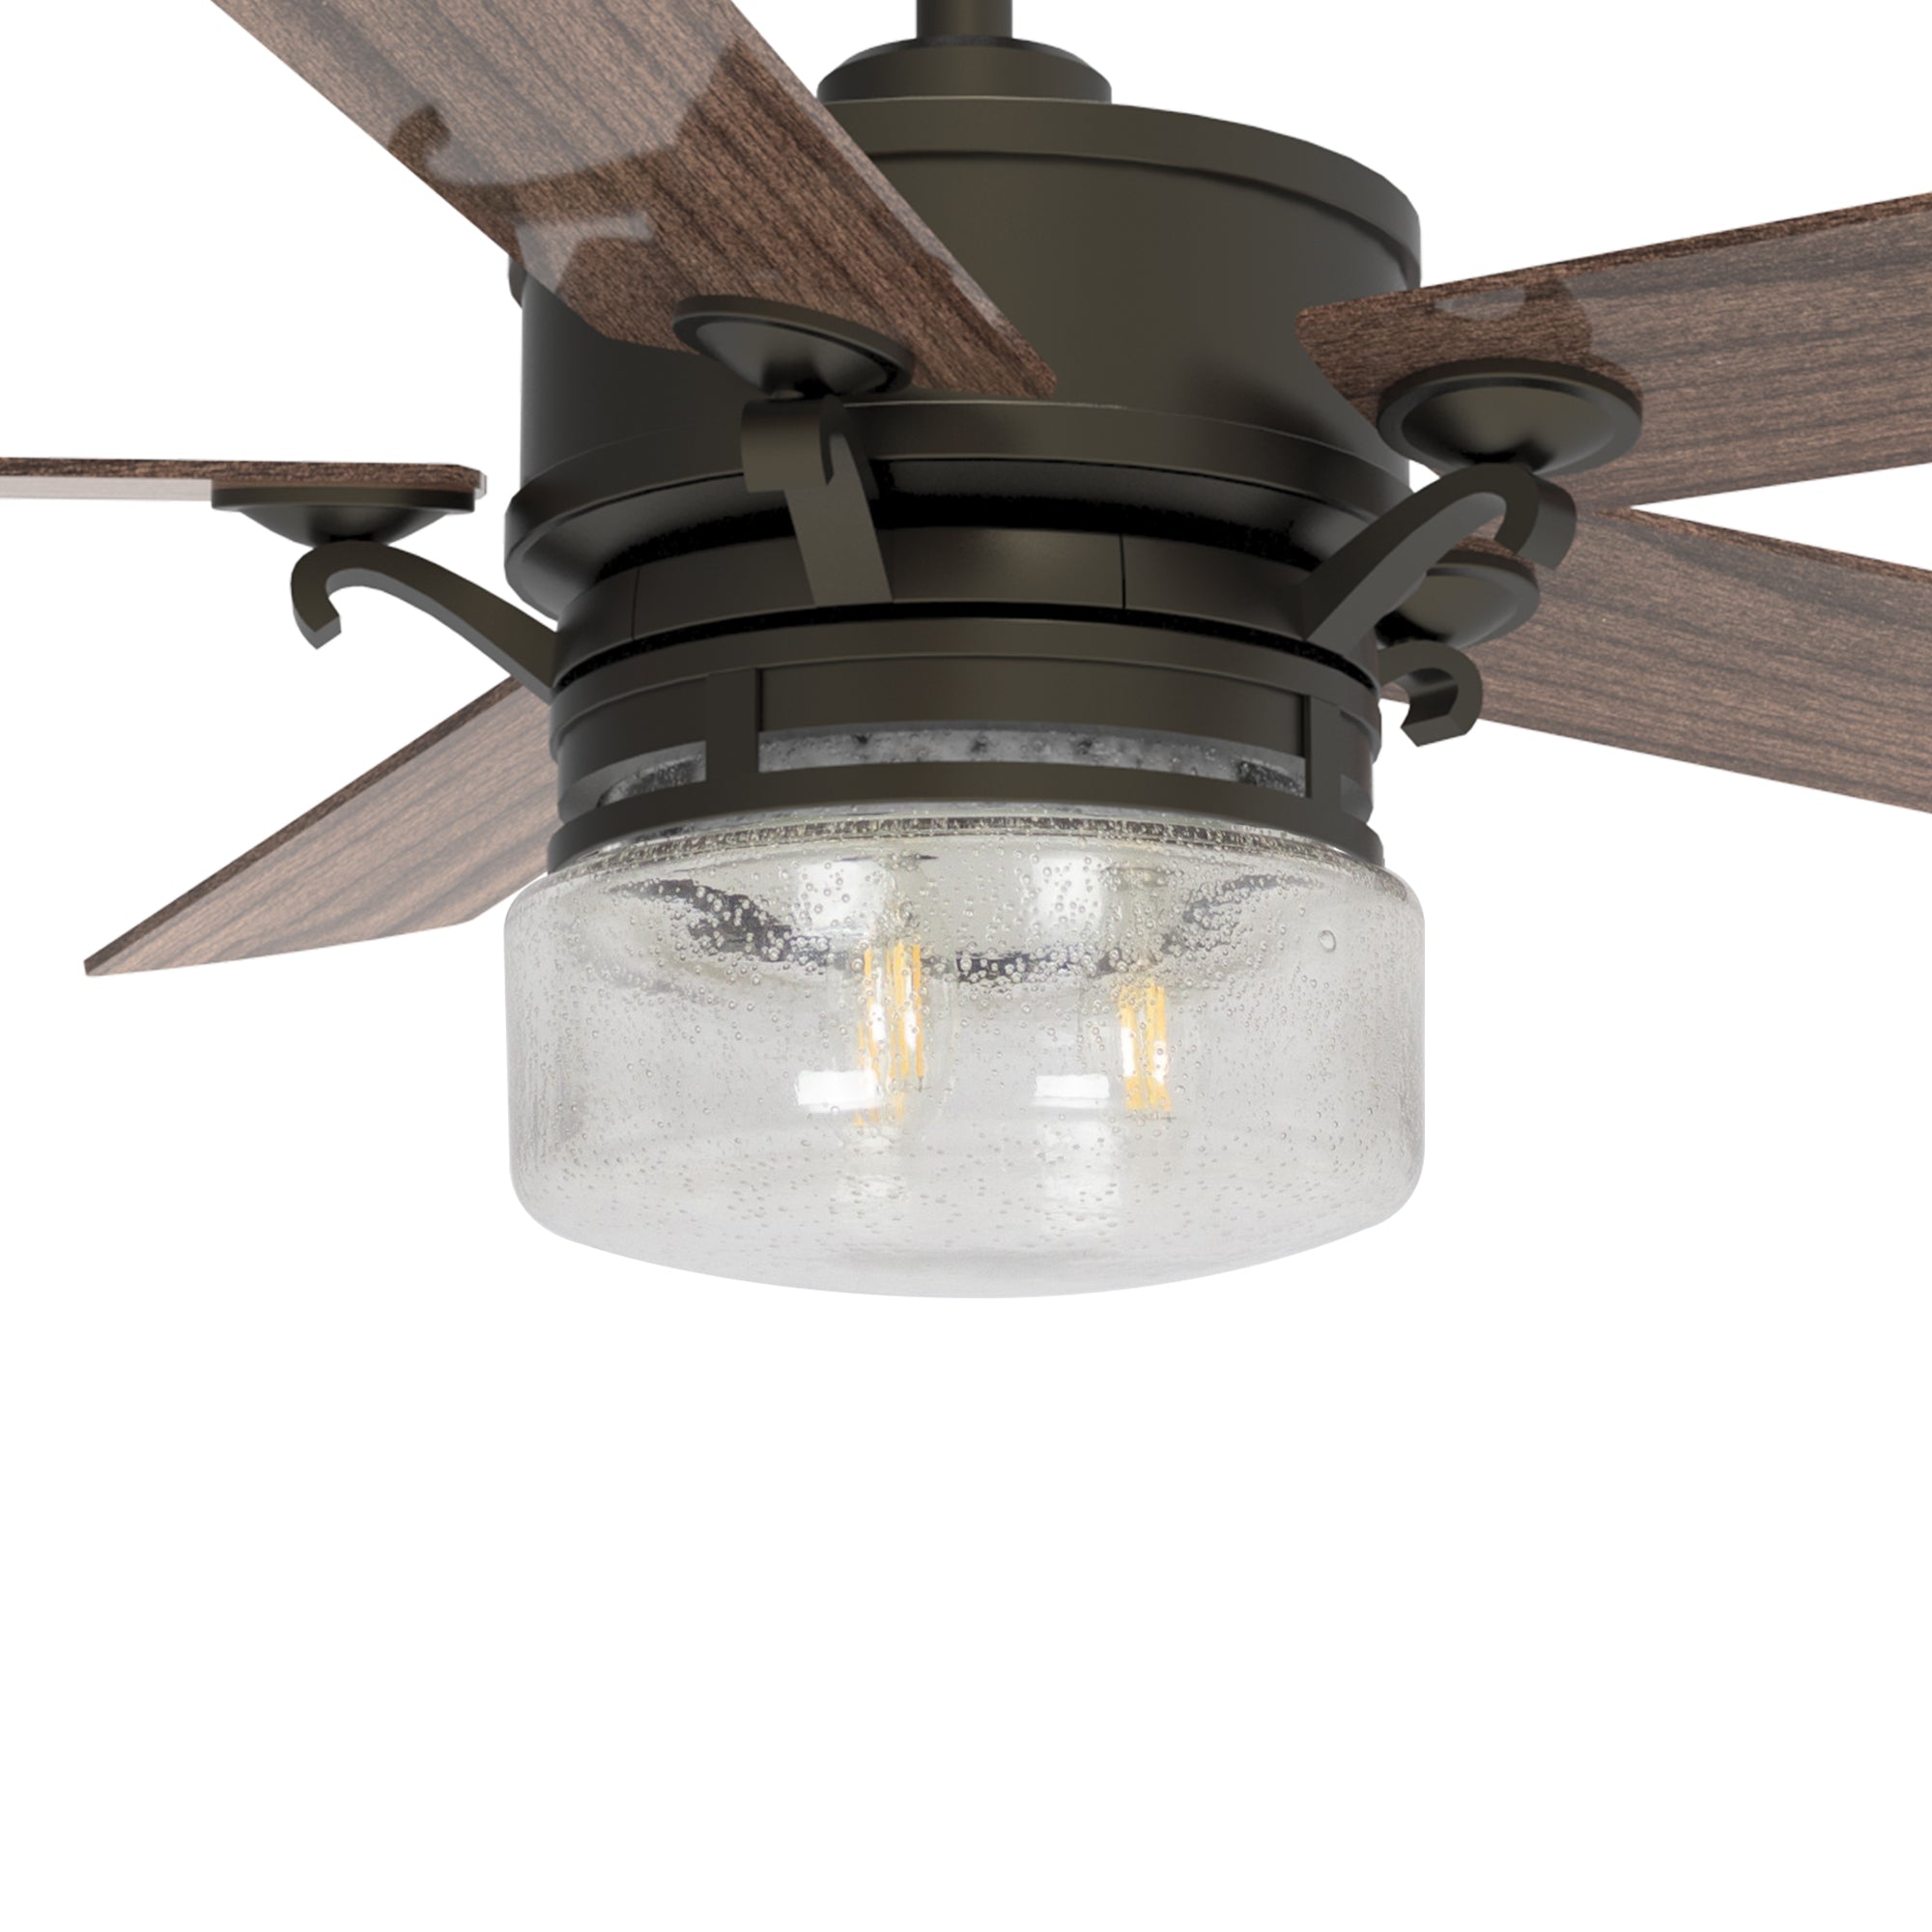 This Alexandria 52&#39;&#39; Smart Ceiling Fan keeps your space cool, bright, and stylish. It is a soft modern masterpiece perfect for your large indoor living spaces. This Wifi smart ceiling fan is a simplicity designing with Oil Rubbed Bronze finish, use elegant Plywood blades with Ultraviolet material and compatible with LED Bulb(Not included). The fan features wall control, Wi-Fi apps, Siri Shortcut and Voice control technology (compatible with Amazon Alexa and Google Home Assistant ) to set fan preferences.